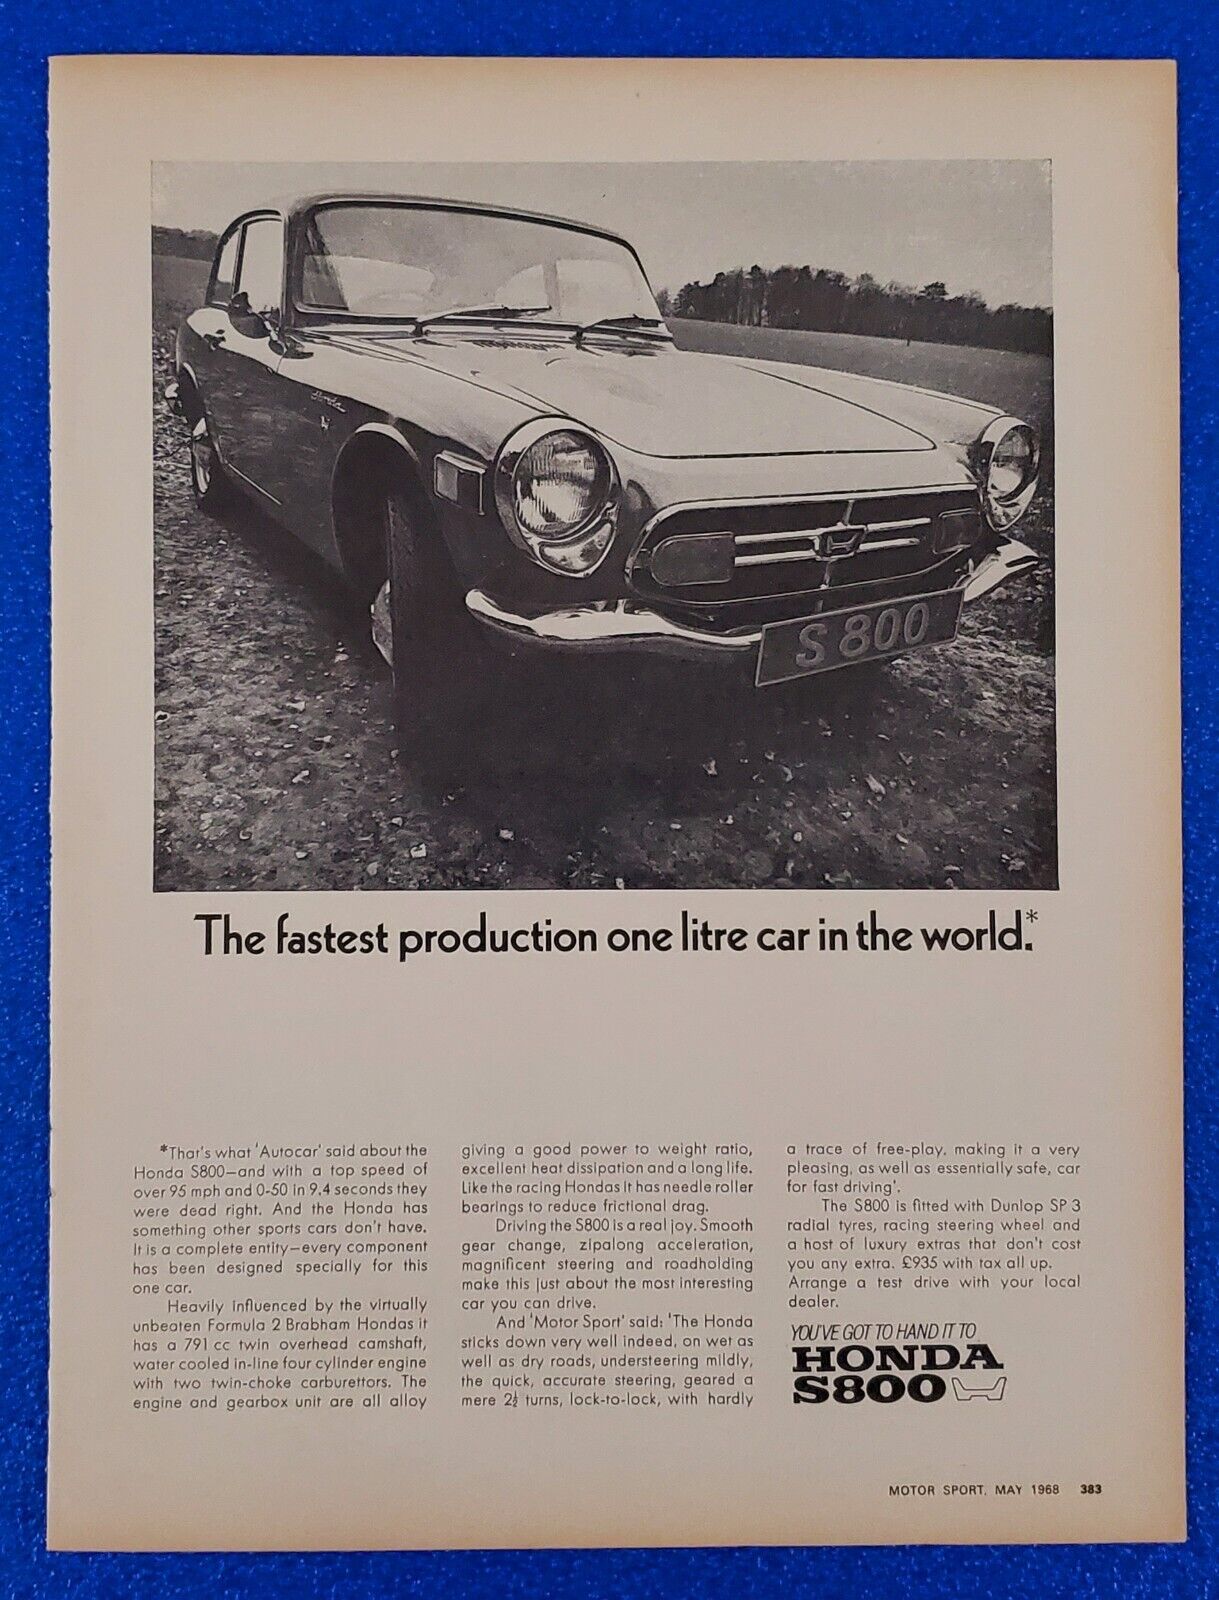 1968 HONDA S800 FASTEST PRODUCTION ONE LITRE CAR IN THE WORLD ORIGINAL PRINT AD